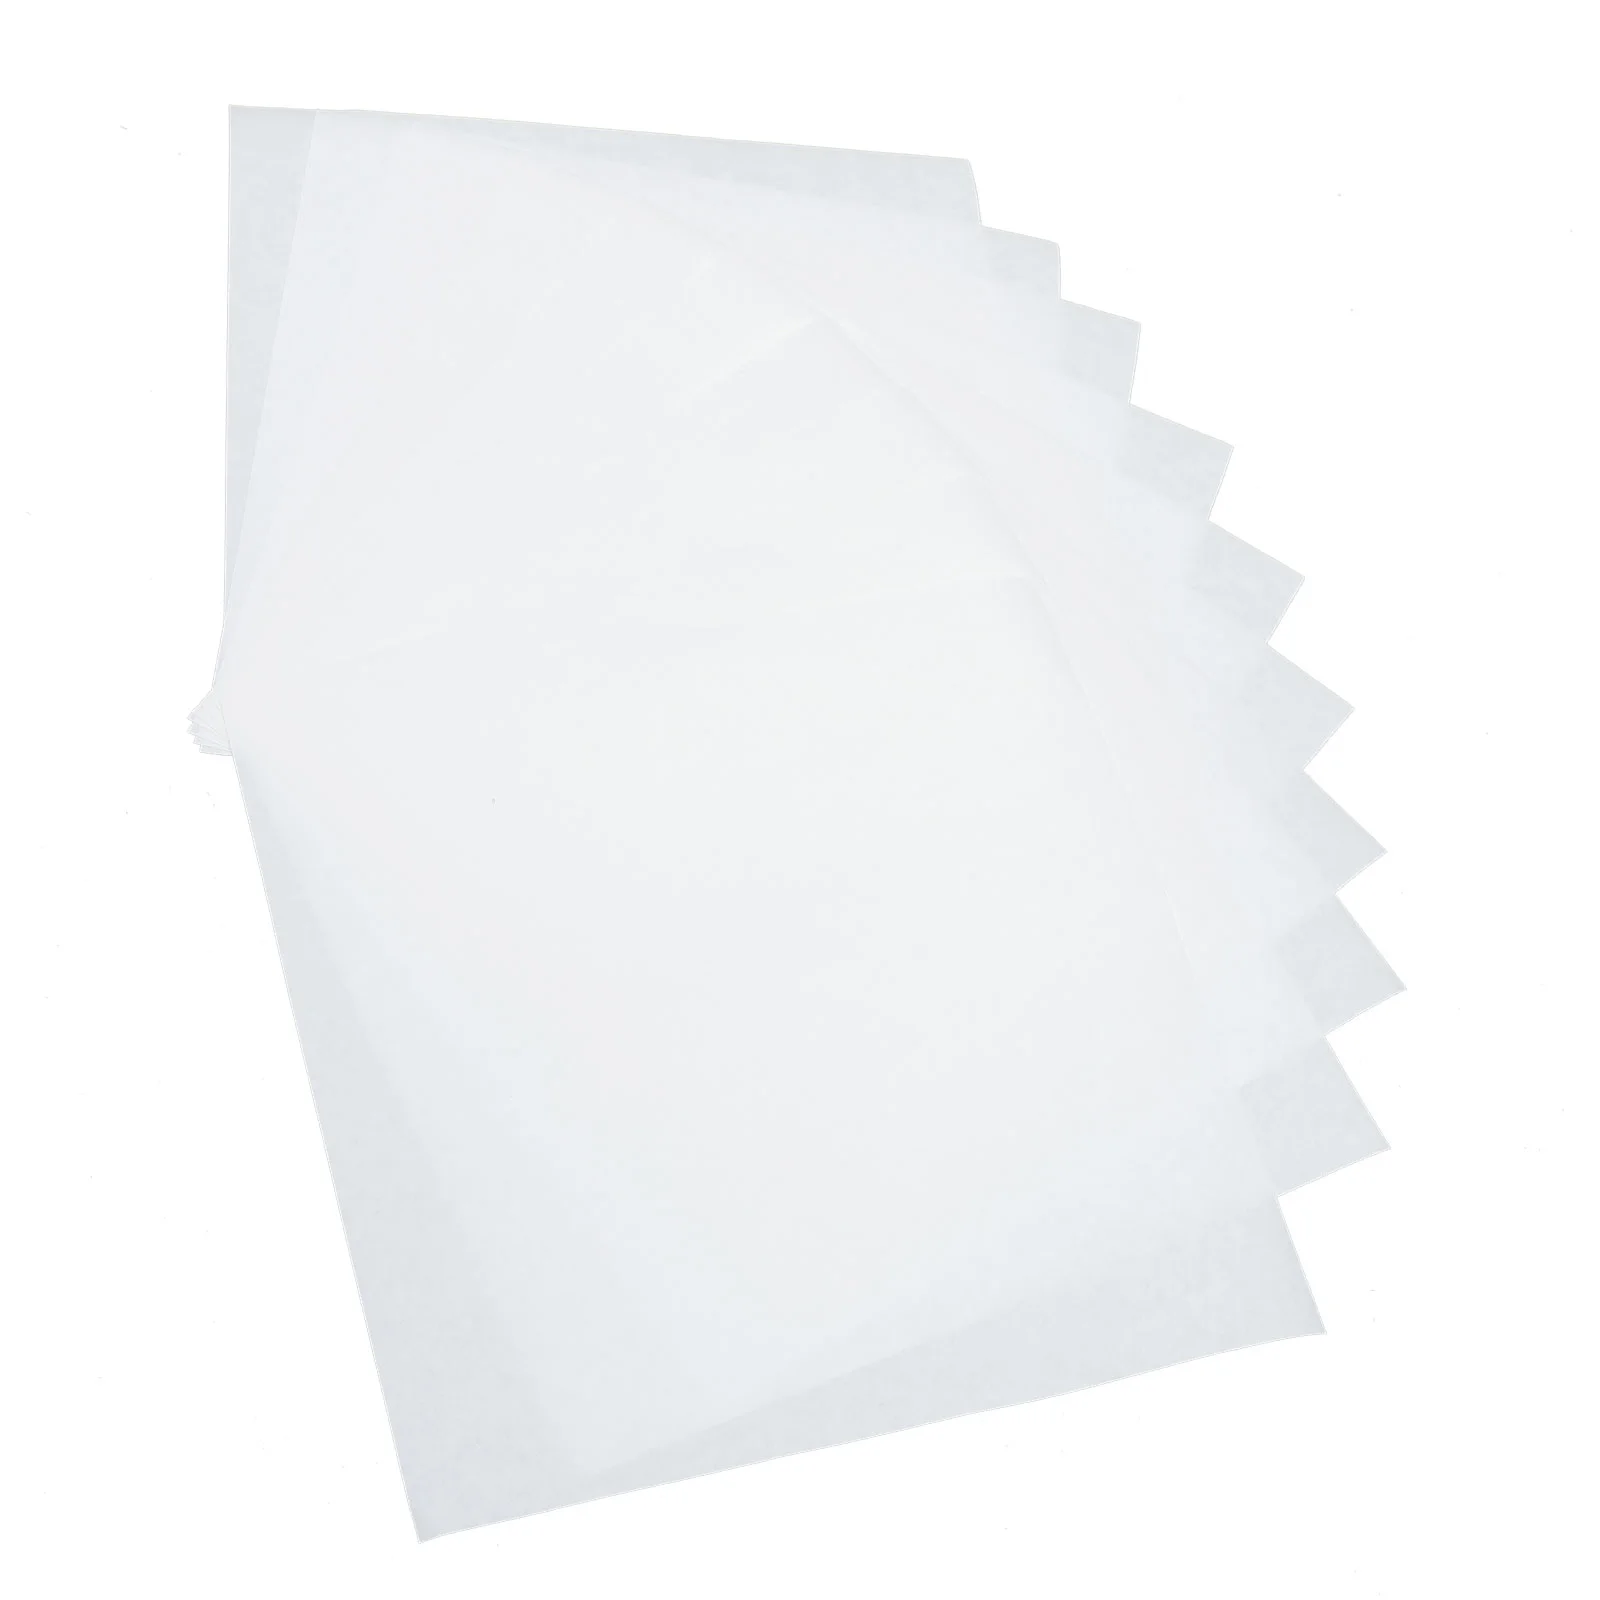 

30 Sheets Laboratory Filter Paper Labs Papers for Absorbent Experiment Filtering Absorbing High